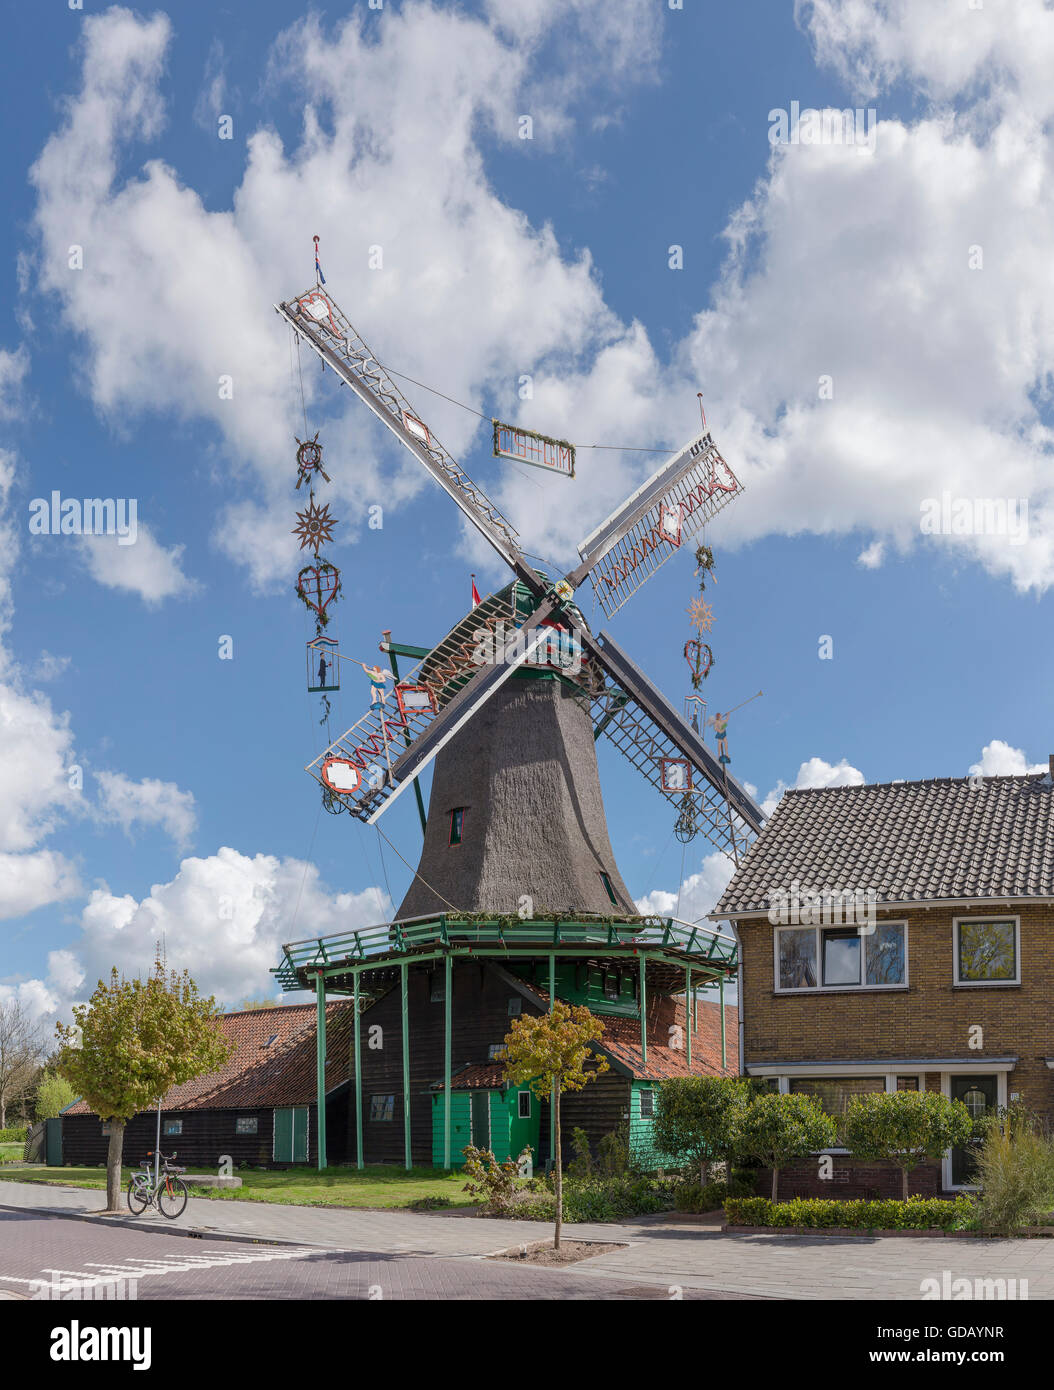 Windmill The Yearling in festive decoration Stock Photo